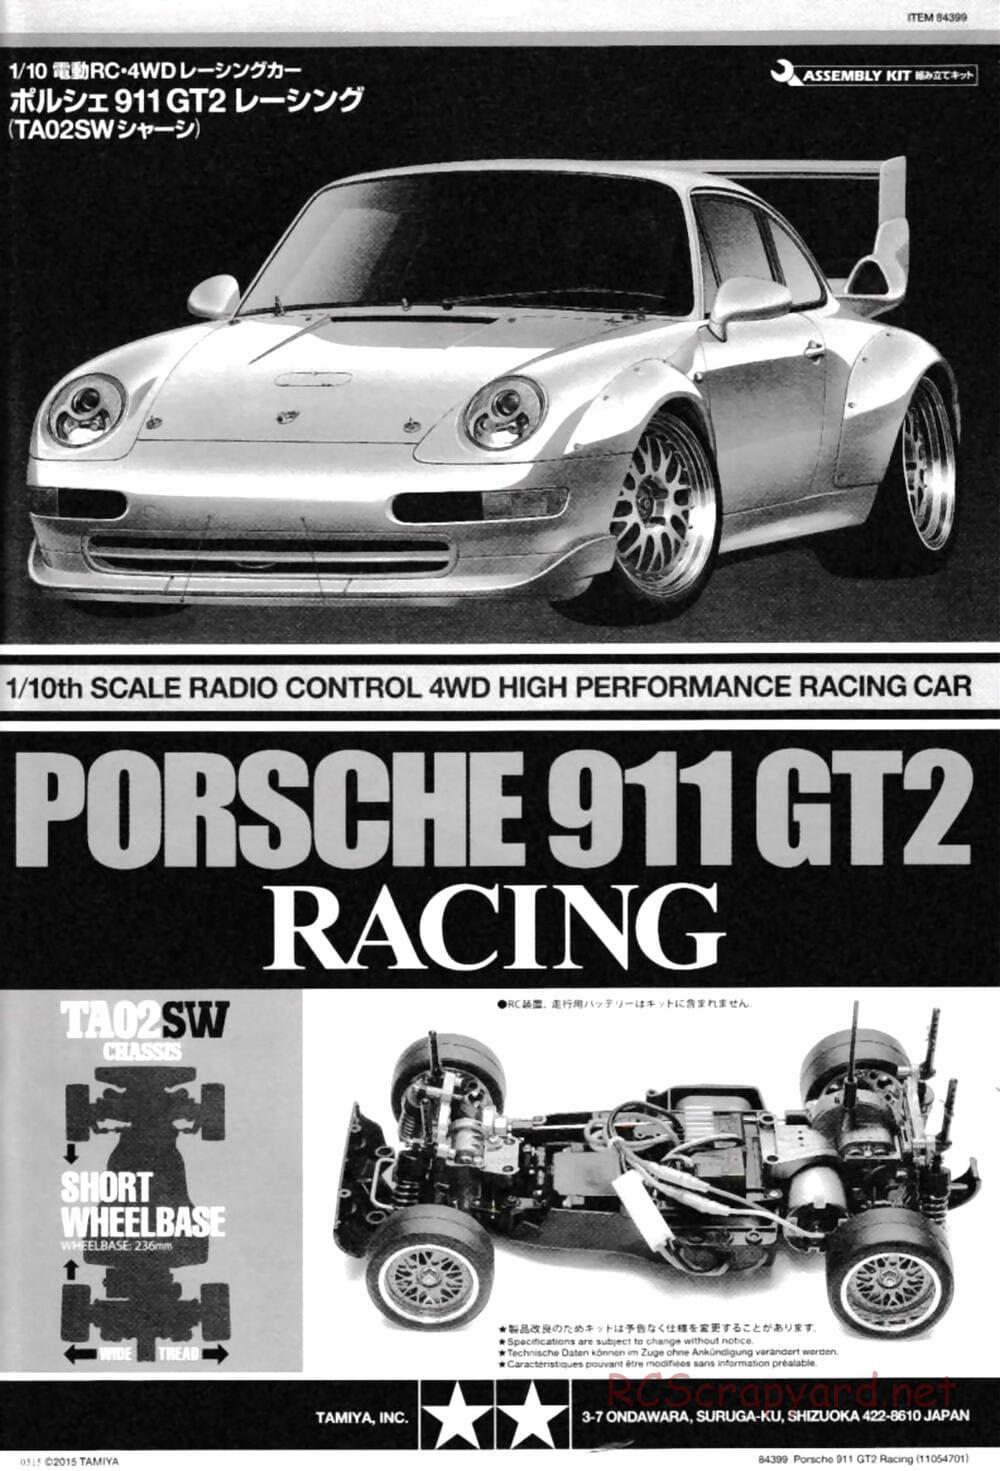 Tamiya - Porsche 911 GT2 Racing - TA02SW Chassis - Manual - Page 1